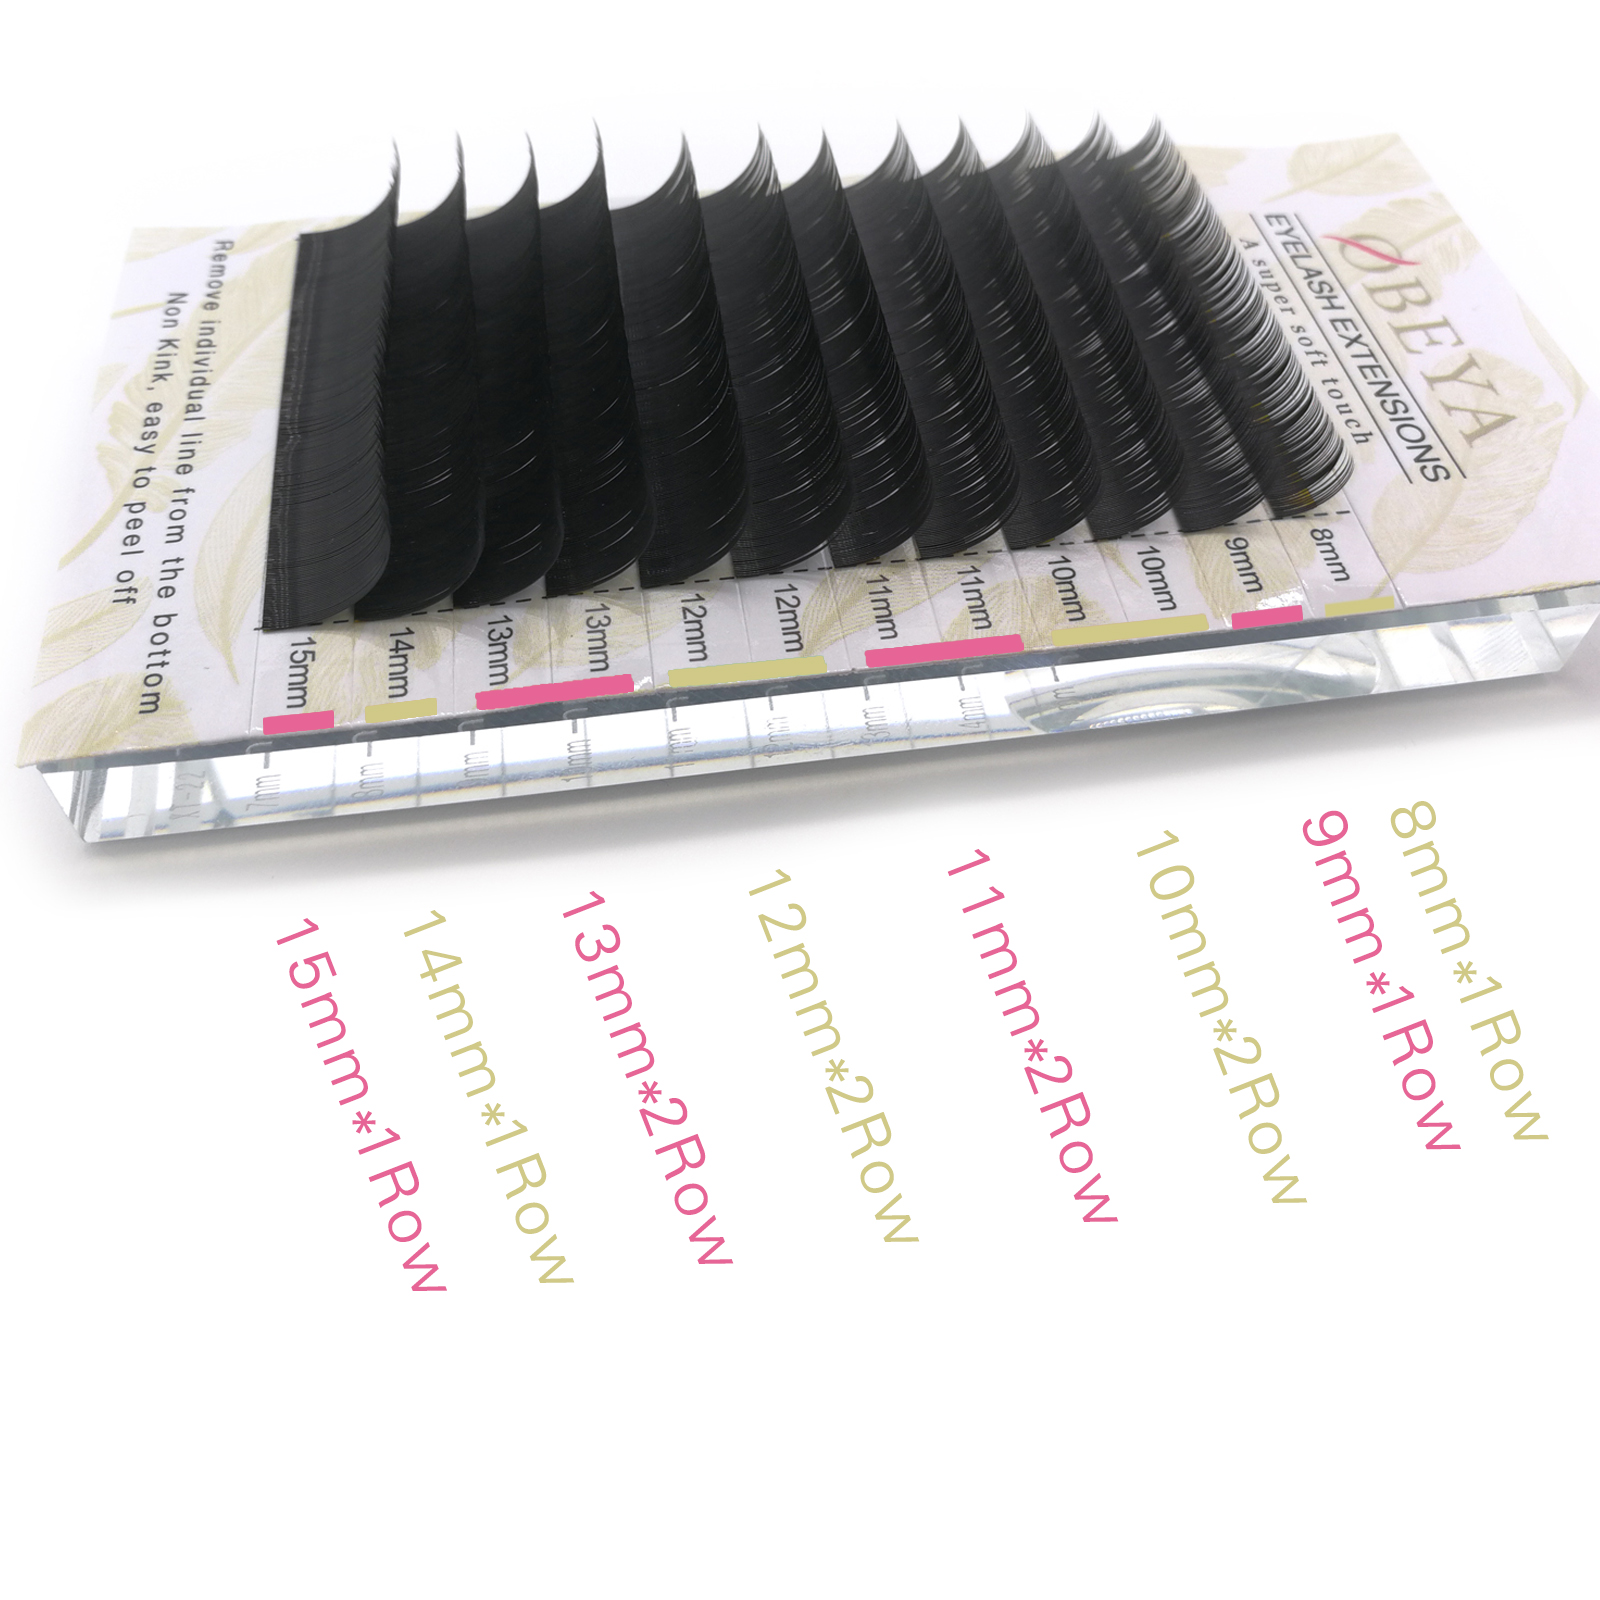 Fast Delivery for Korea PBT Fiber Russian Volume Eyelash Extension 0.03-0.25mm Thickness Lashes in the US/UK YY89